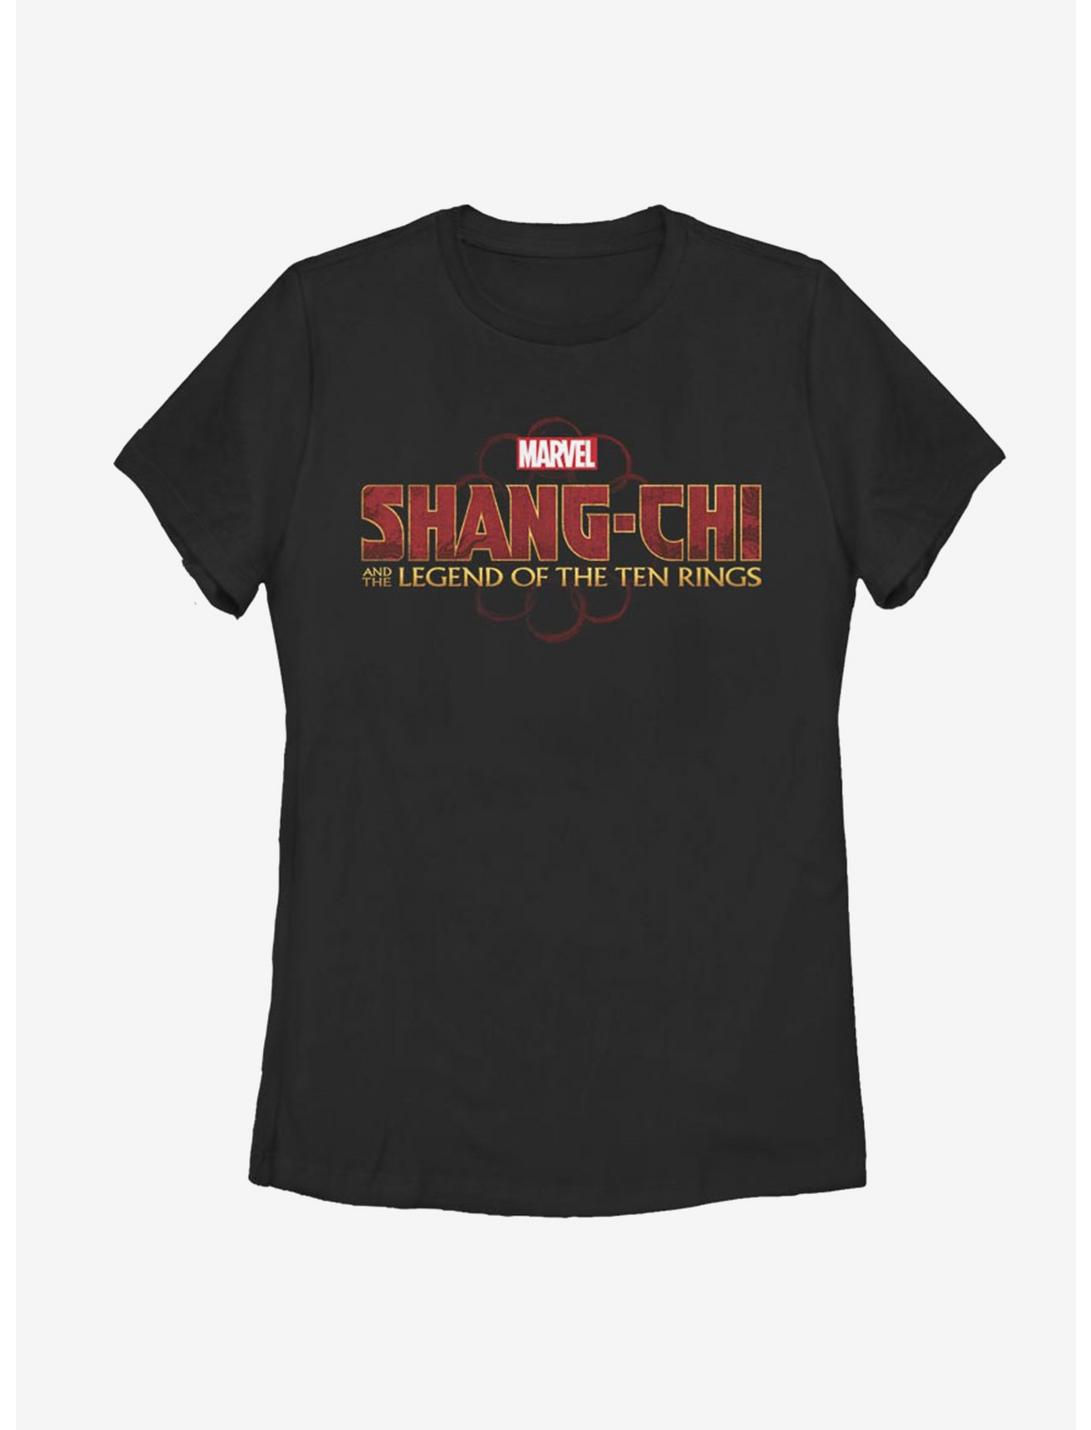 Marvel Shang-Chi And The Legend Of The Ten Rings Womens T-Shirt, BLACK, hi-res